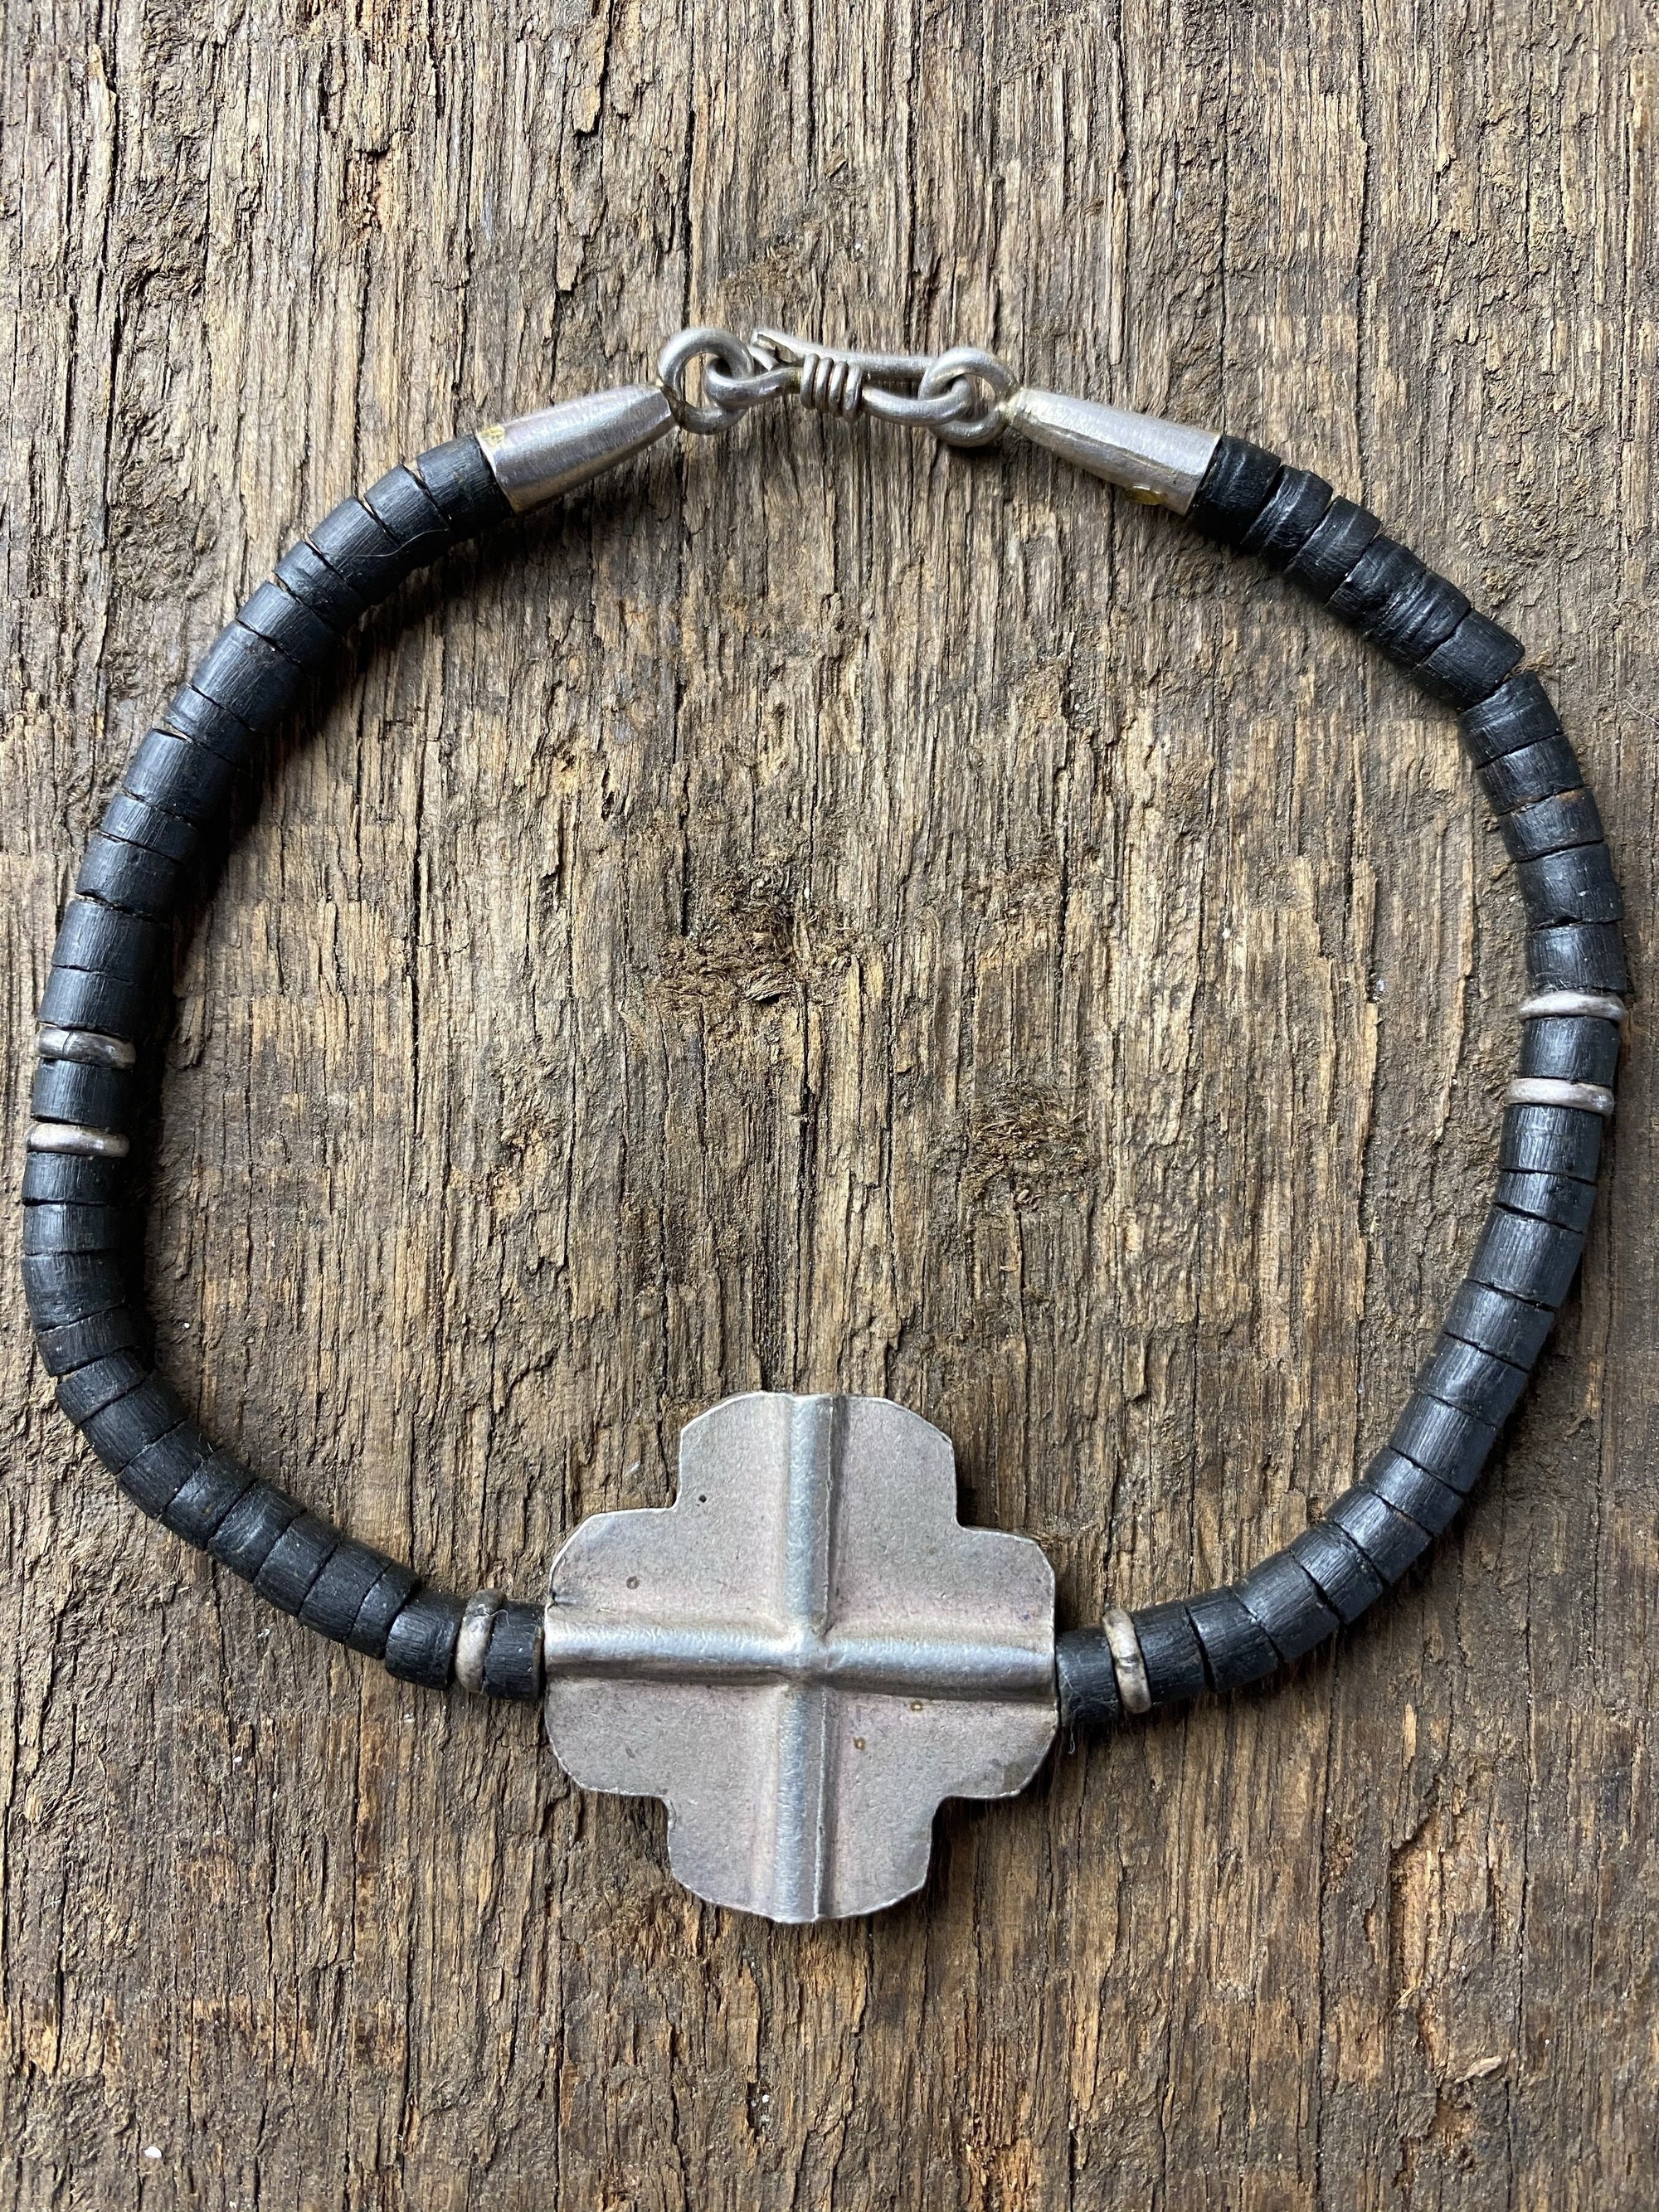 Coconut wood beads and Karen hilltribe 95% pure silver cross feature with silver detailing and hook clasp